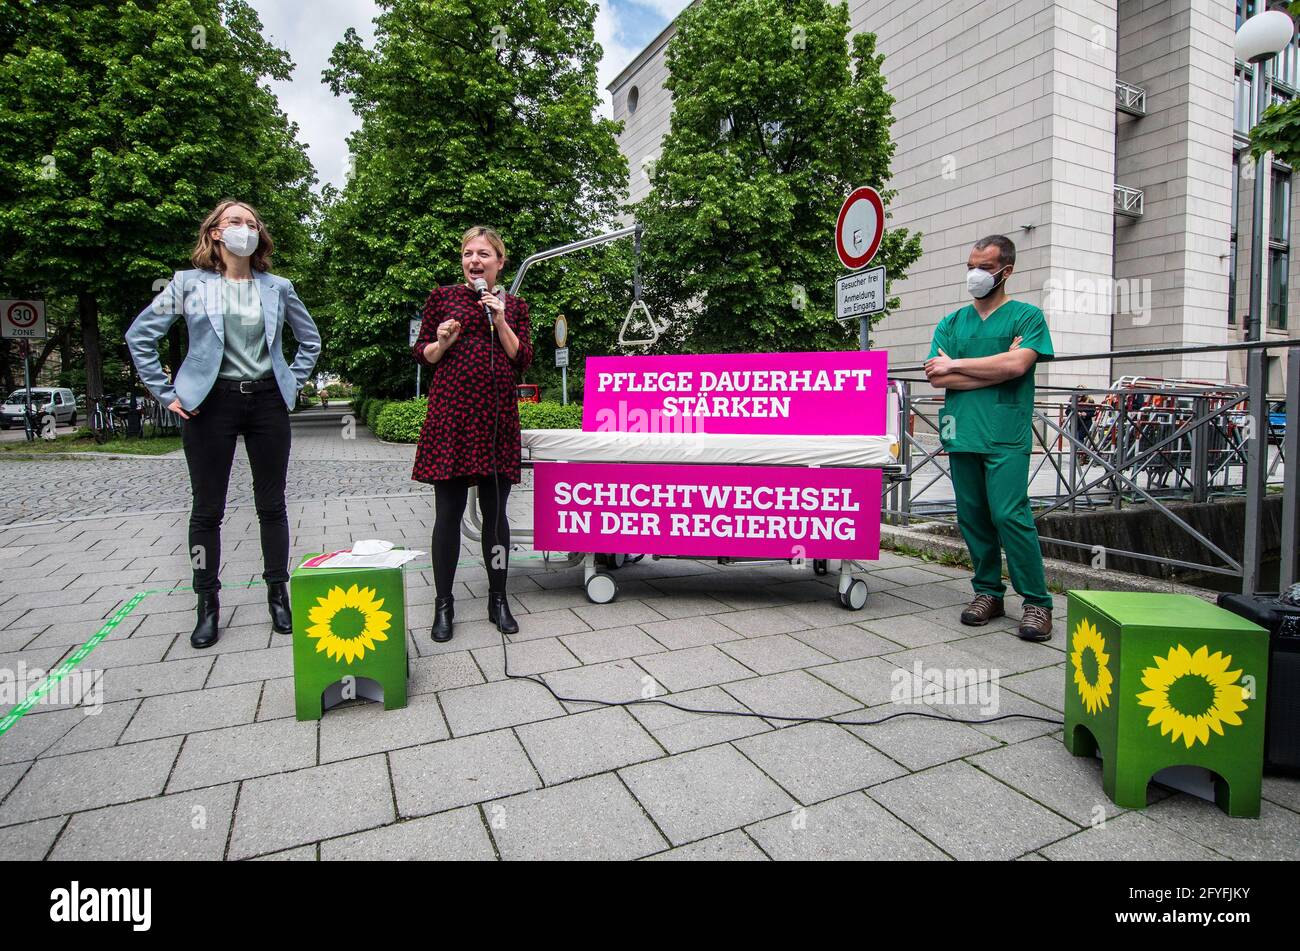 May 28, 2021, Munich, Bavaria, Germany: EVA LETTENBAUER, KATHARINA SCHULZE, and ANDREAS KAHL of the Bavarian Greens. The Bavarian Greens (die Gruenen/Buendnis90) organized a protest action at the Bavarian Staatskanzlei (government building) in support of healthcare workers. During the Coronavirus crisis, the working conditions for this sector have come into greater focus and The Greens are pushing for better politics for this sector where pay structures and working conditions are improved and there exists a pathway for communication between the workers and political structures. (Credit Image Stock Photo